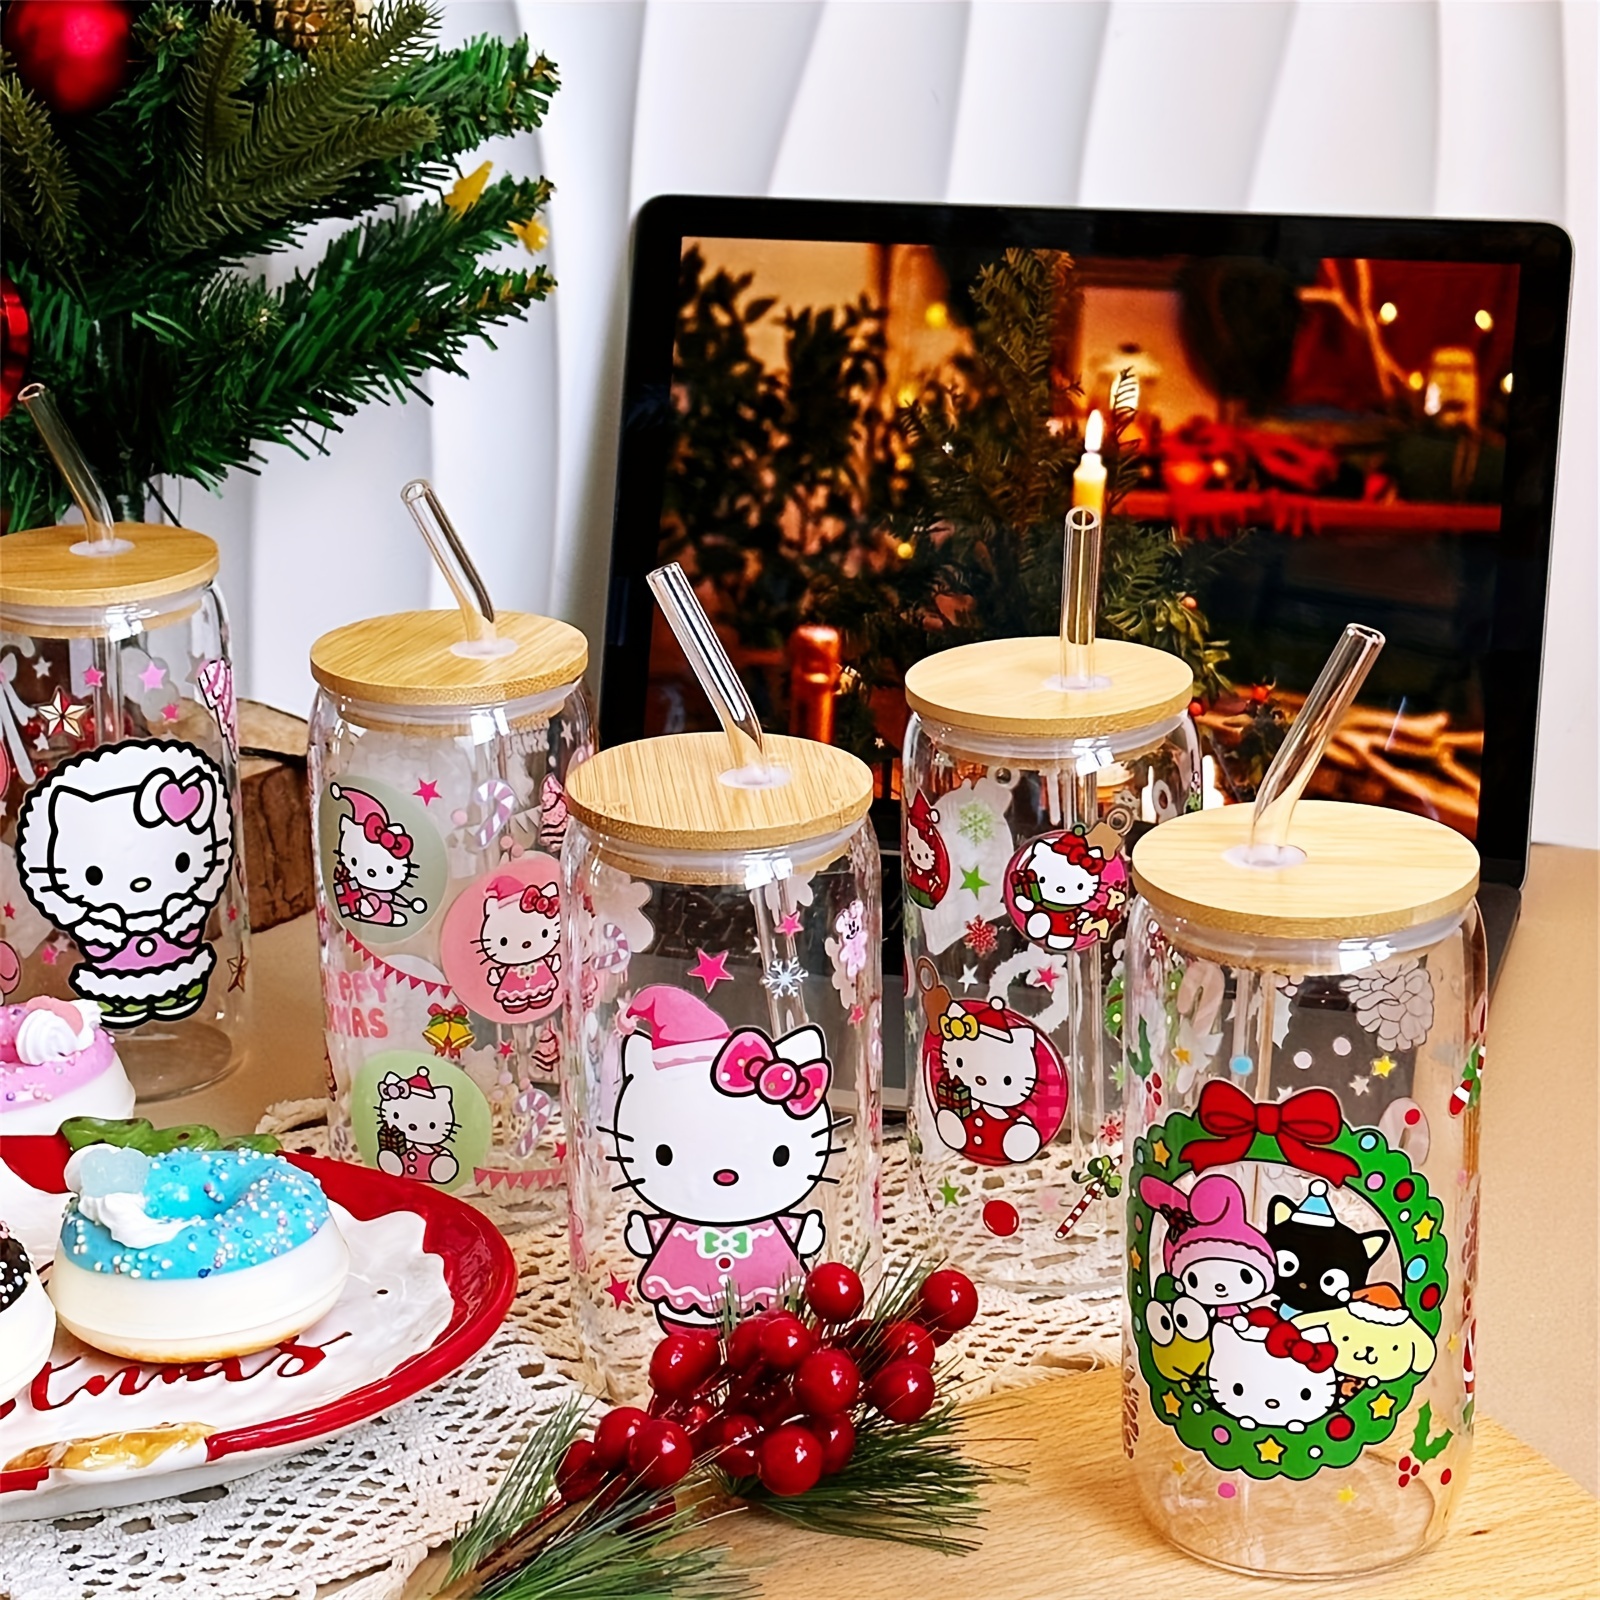 Hello Kitty Christmas Glass Tumbler With Lid And Straw 16 Oz NEW (SET OF 2)